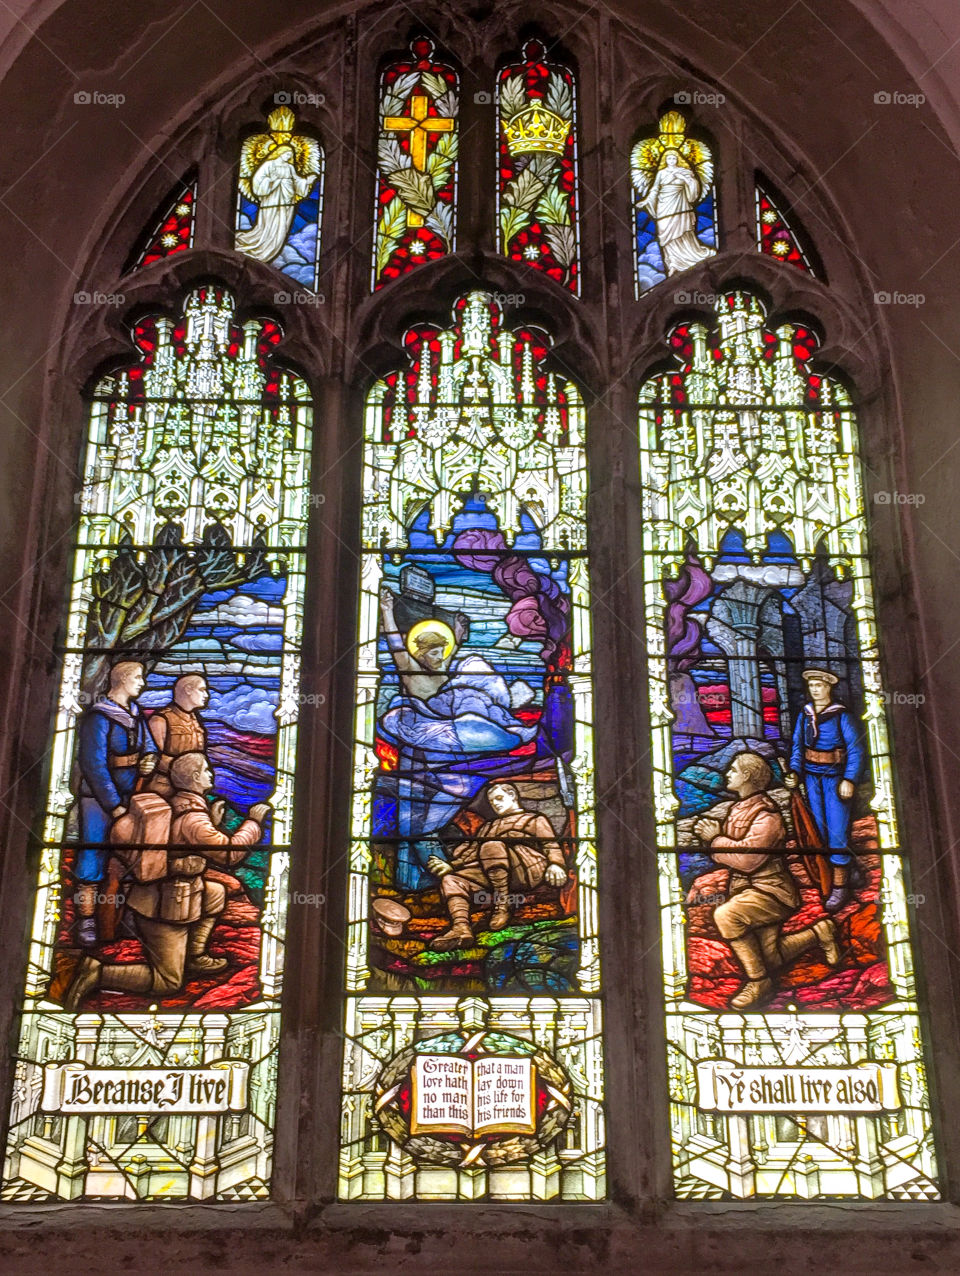 Stained glass window from an Essex church, set up as a memorial to those who died in the First World War.